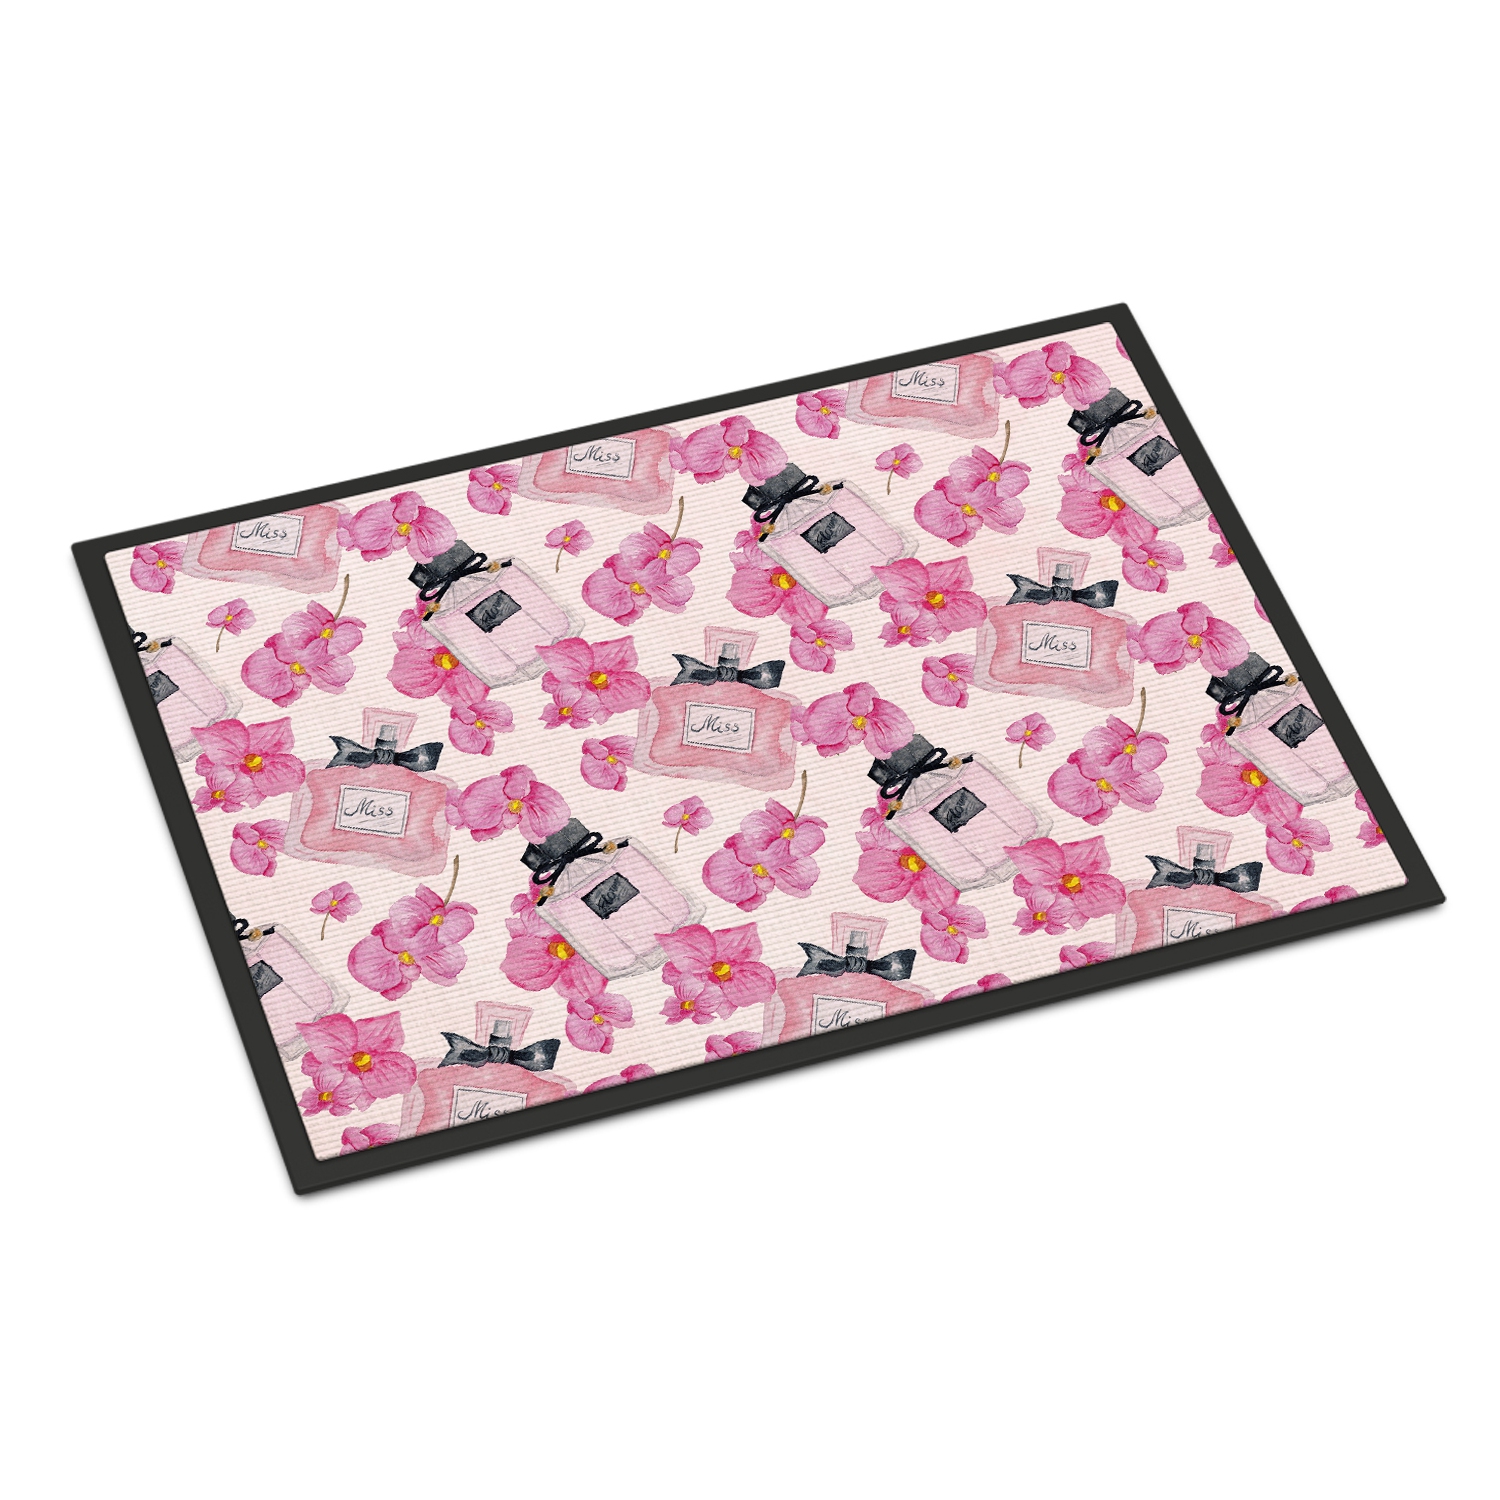 Caroline's Treasures BB7510MAT Watercolor Pink Flowers and Perfume Indoor or Outdoor Mat 18x27, 18H X 27W, multicolor